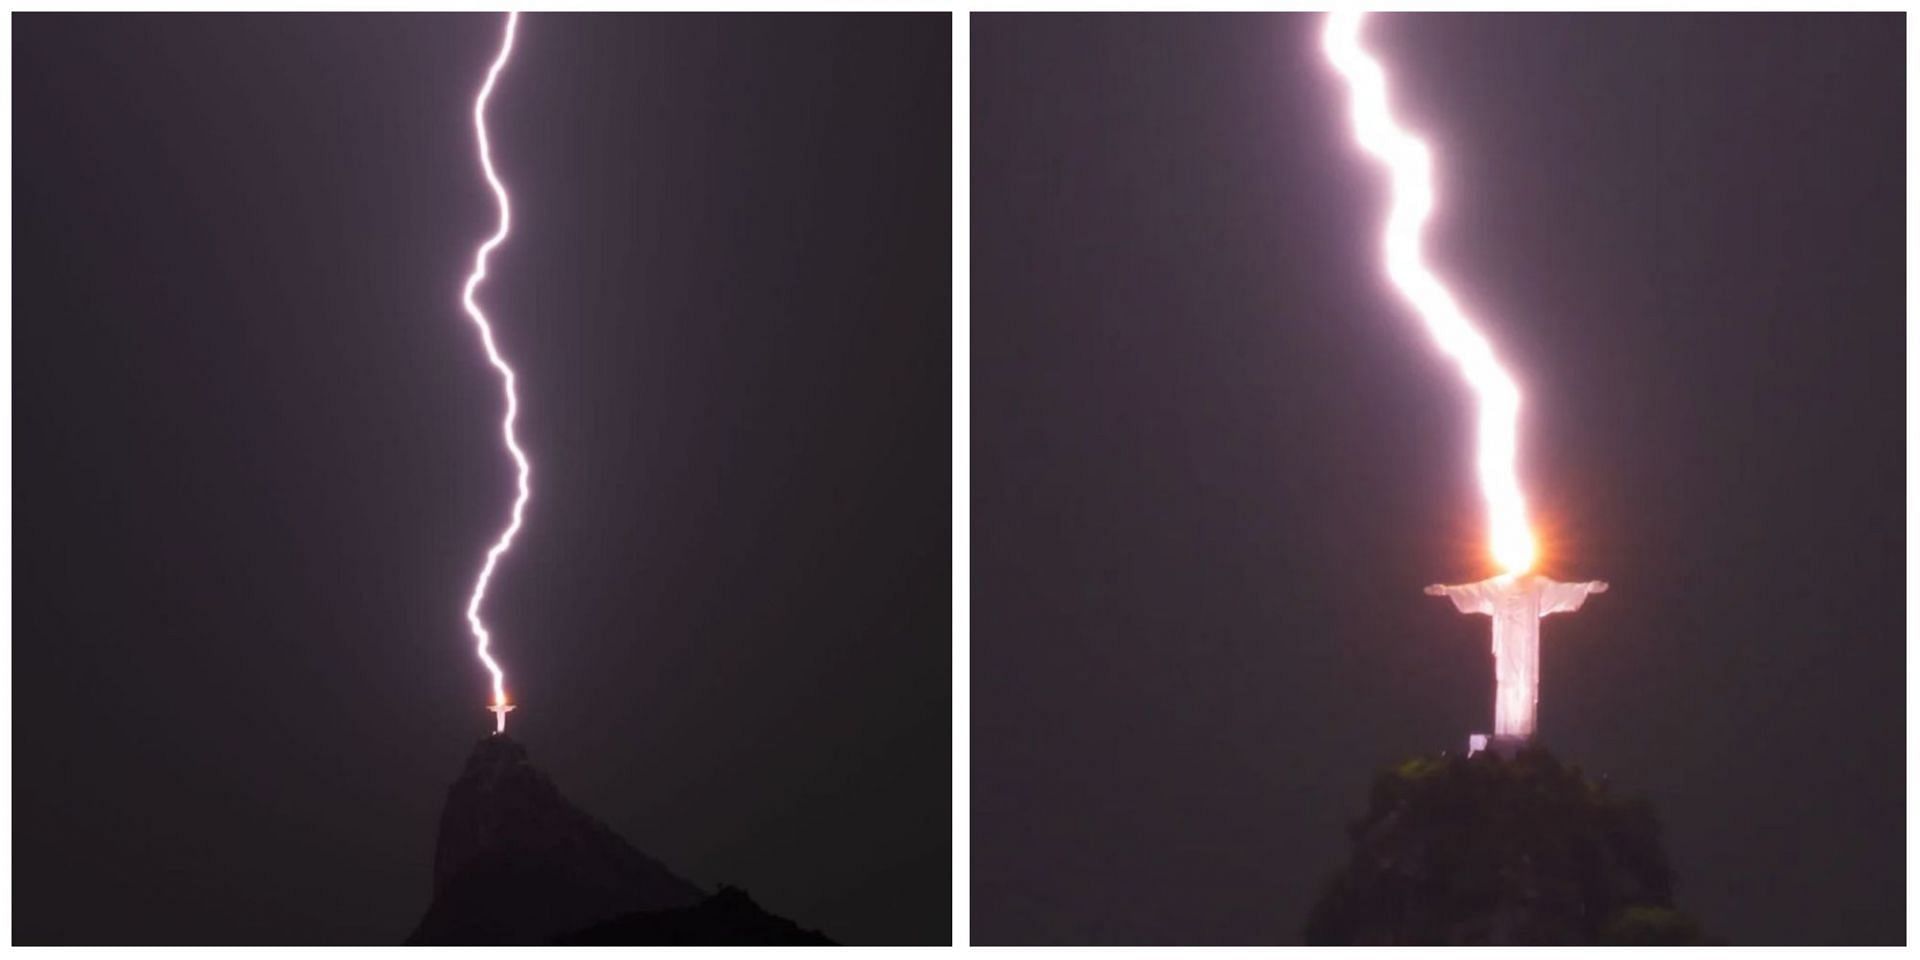 Social media users in awe after photographer shared pictures of lightning striking Christ the Redeemer statue. (Image via @Fernando Braga /Instagram)